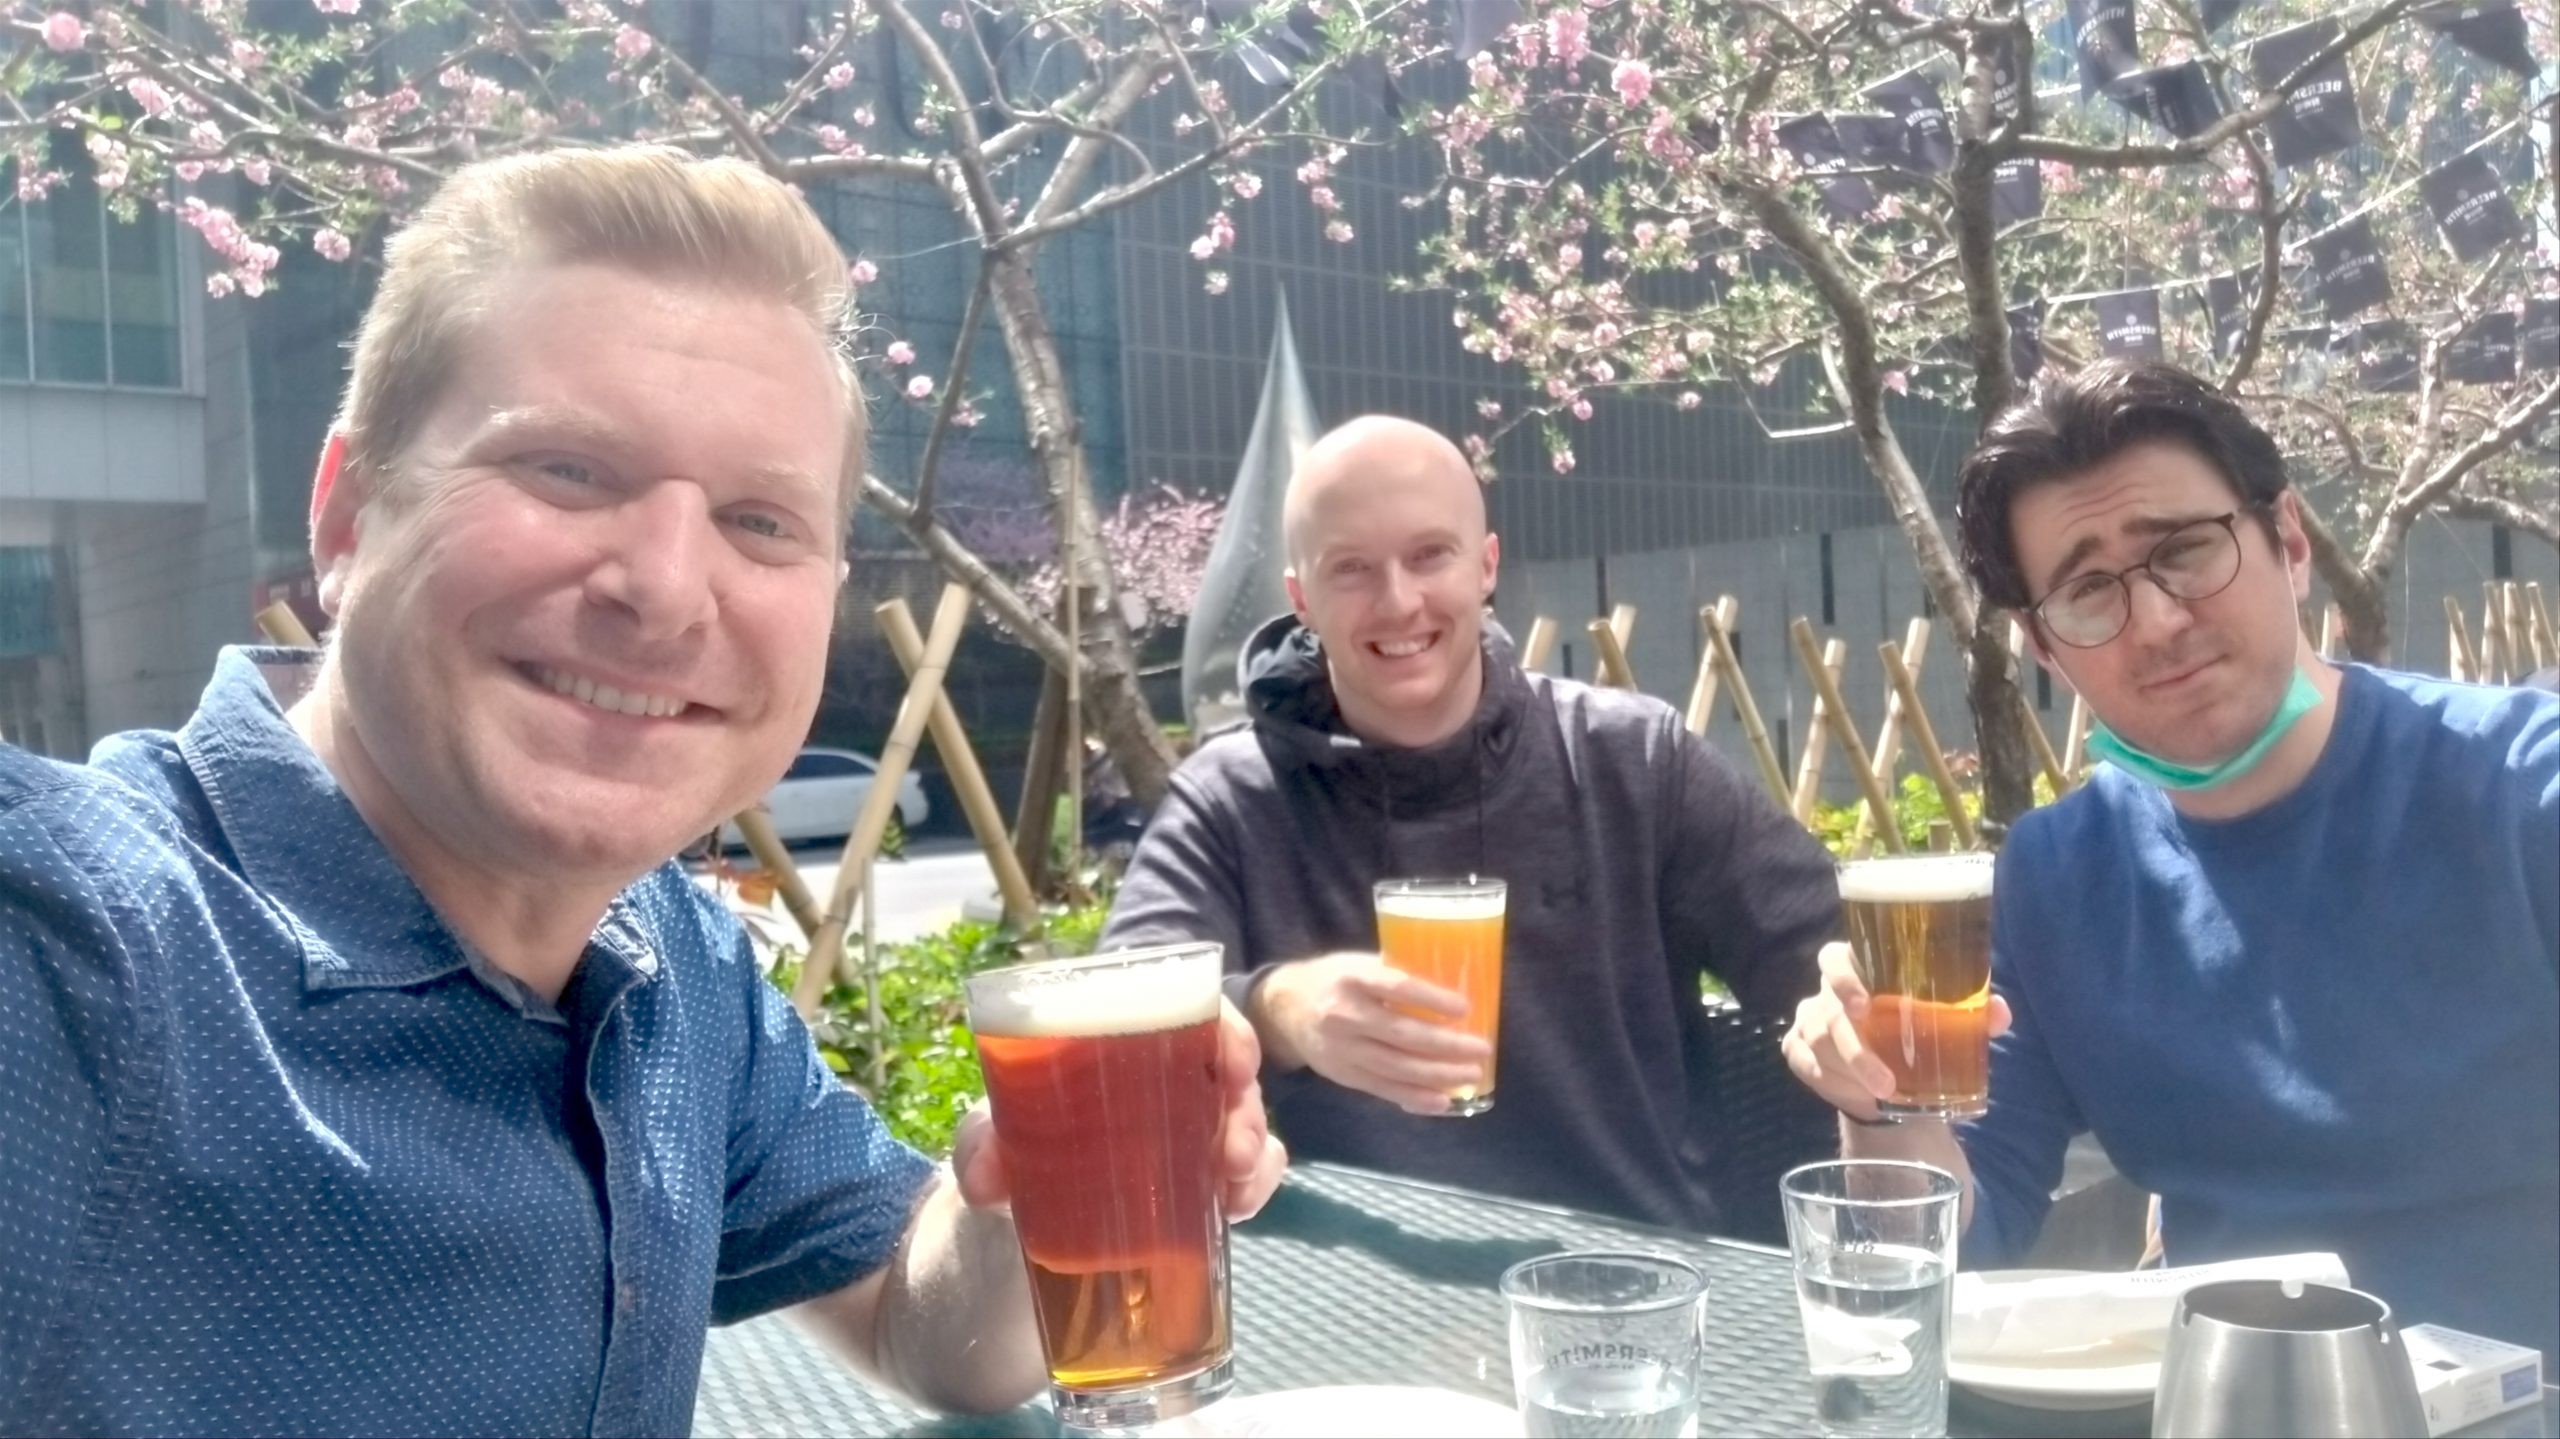 Todd, Rich and Romain reunited at AppInChina HQ in Beijing on April 3, 2020.